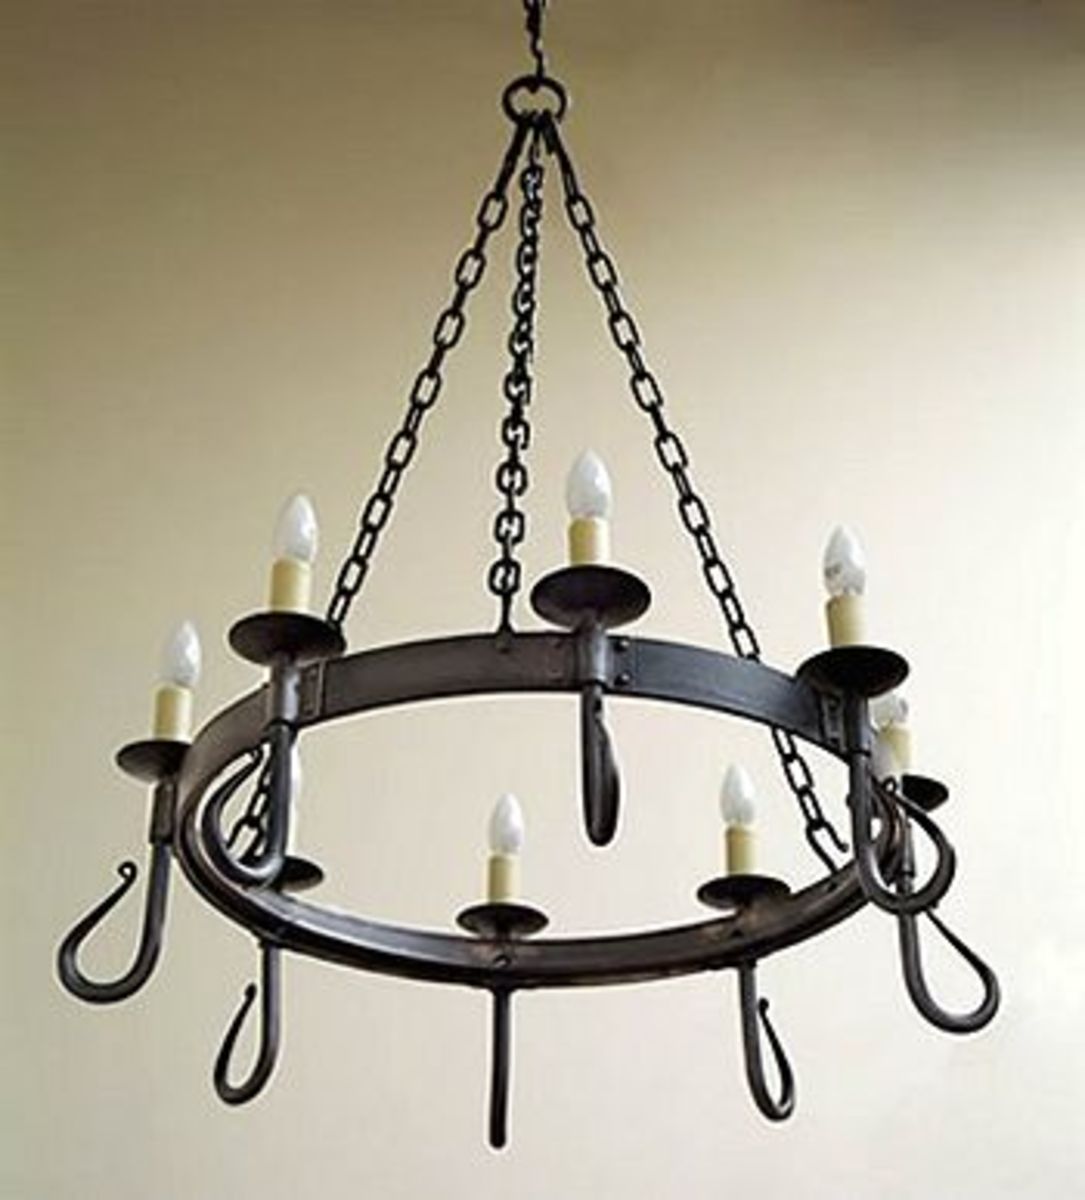 Vintage wrought iron chandeliers